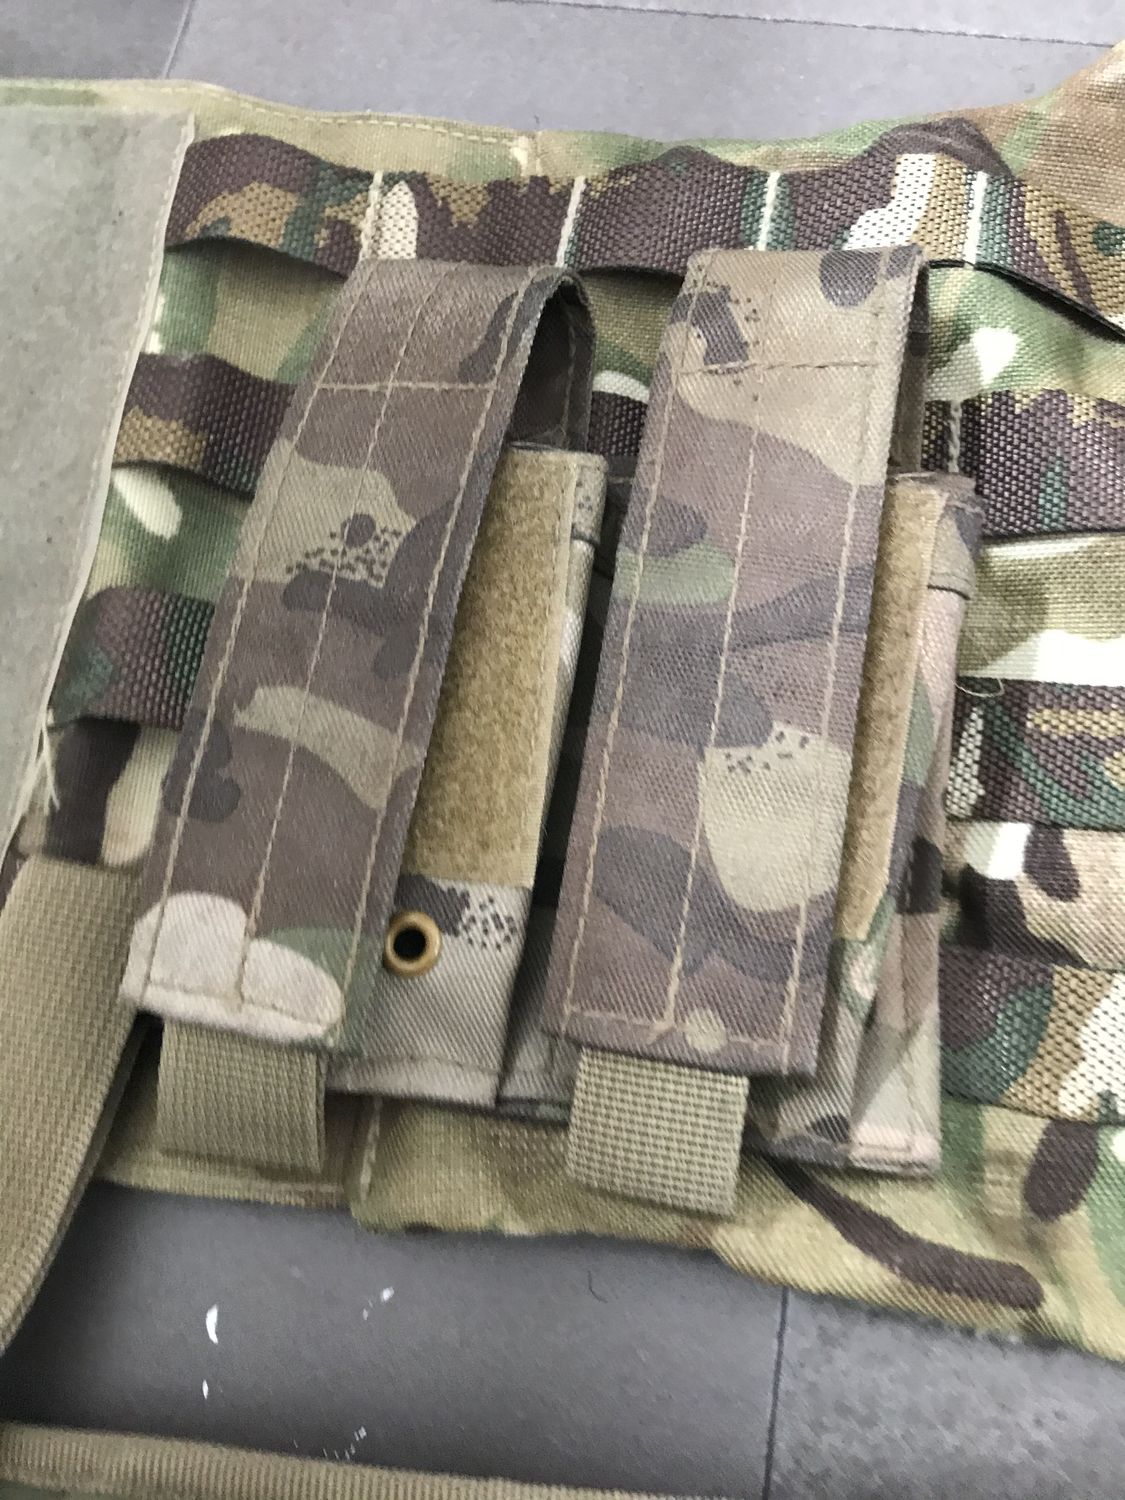 Osprey MK4 personalised (180/104) - Gear - Airsoft Forums UK